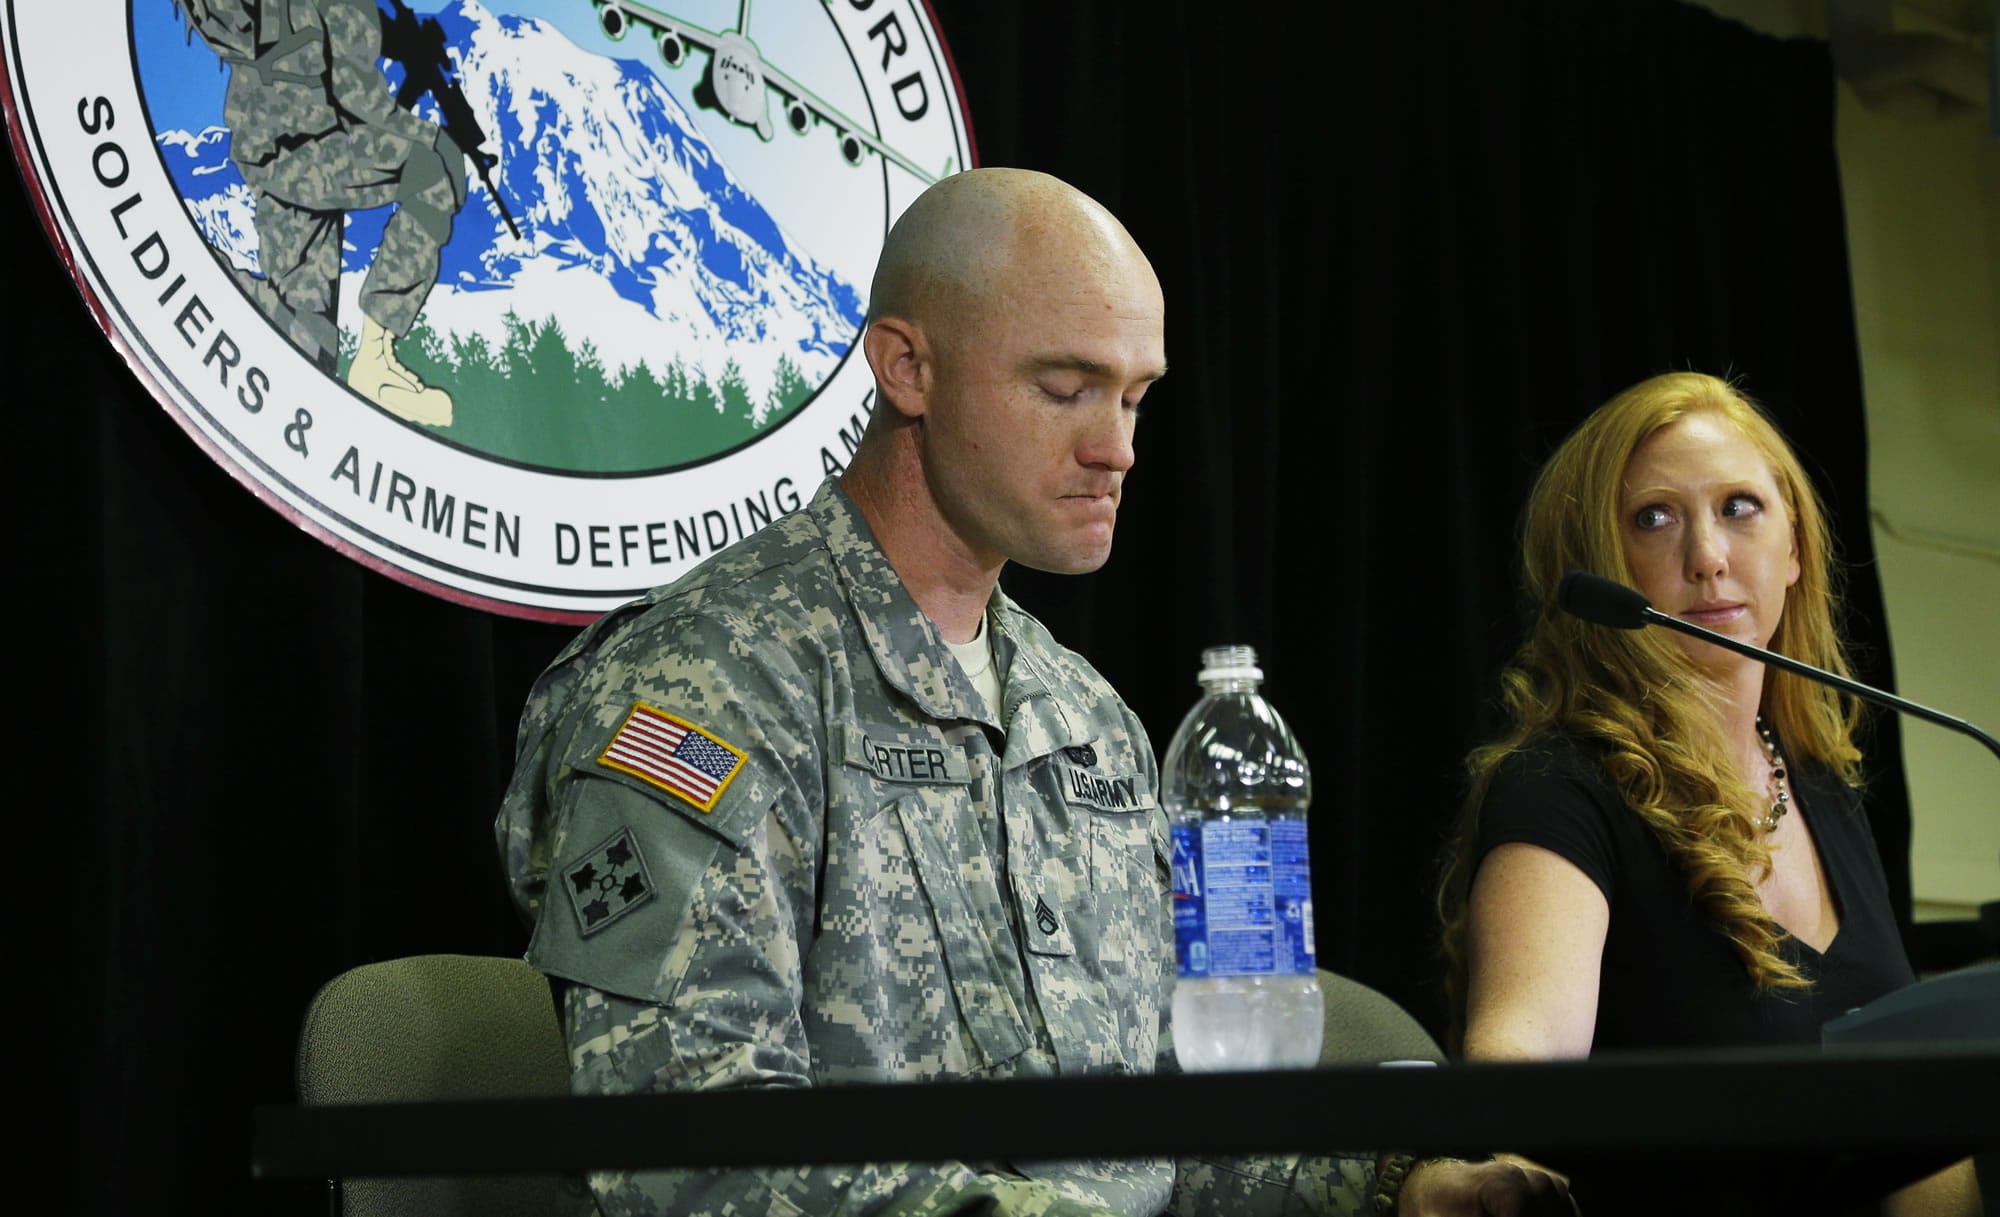 U.S. Army Staff Sgt. Ty Carter, left, becomes emotional as he talks to reporters Monday at Joint Base Lewis-McChord in Washington as his wife, Shannon Carter, looks on at right. Ty Carter will be awarded the Medal of Honor in August for his actions during a 2009 battle at a mountain outpost in Afghanistan where U.S.